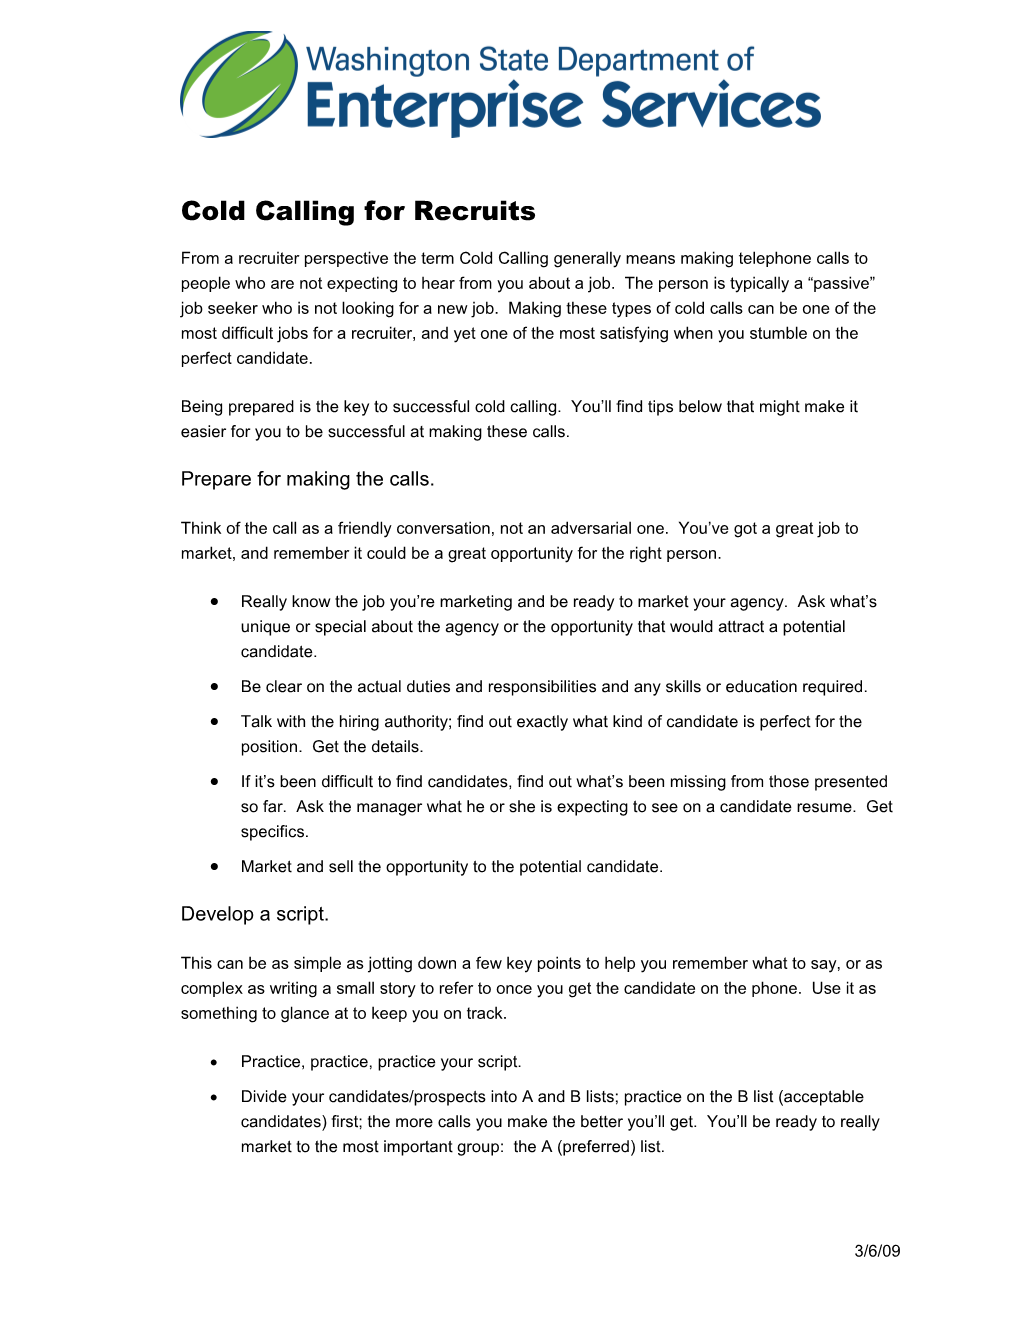 Cold Calling for Recruits